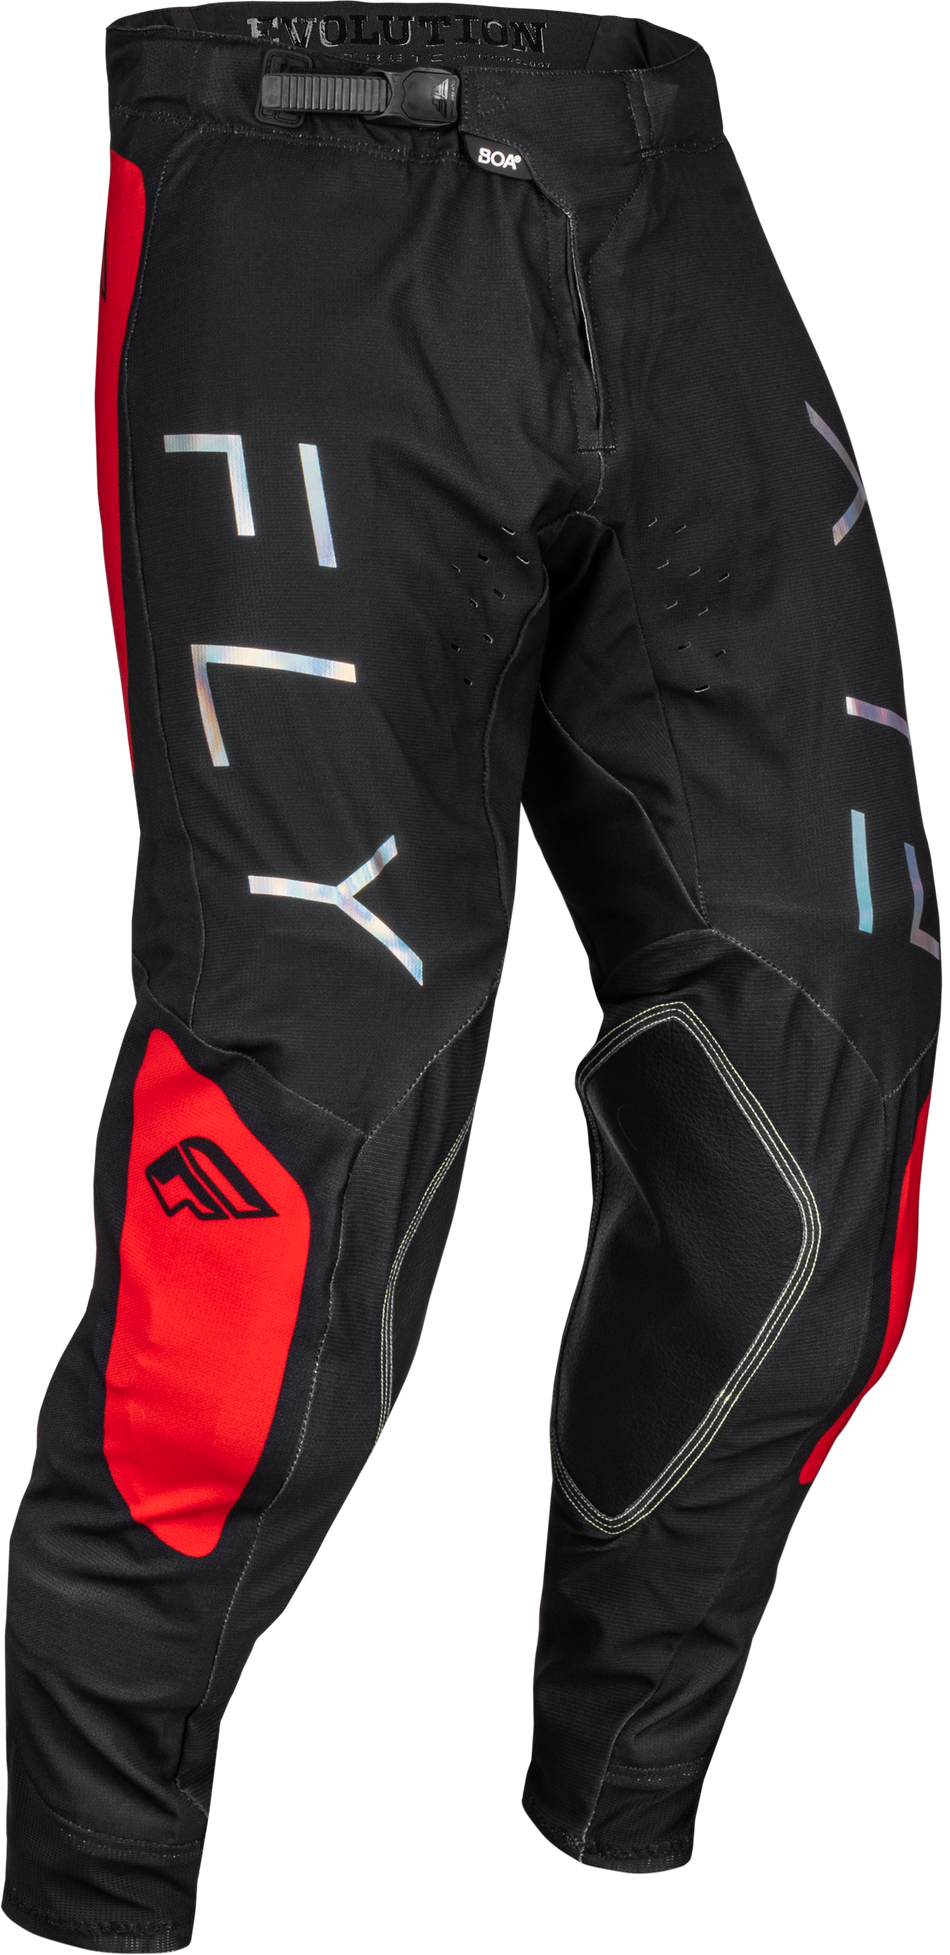 FLY RACING Evolution Dst Pants Black/Red Sz 34 377-13034